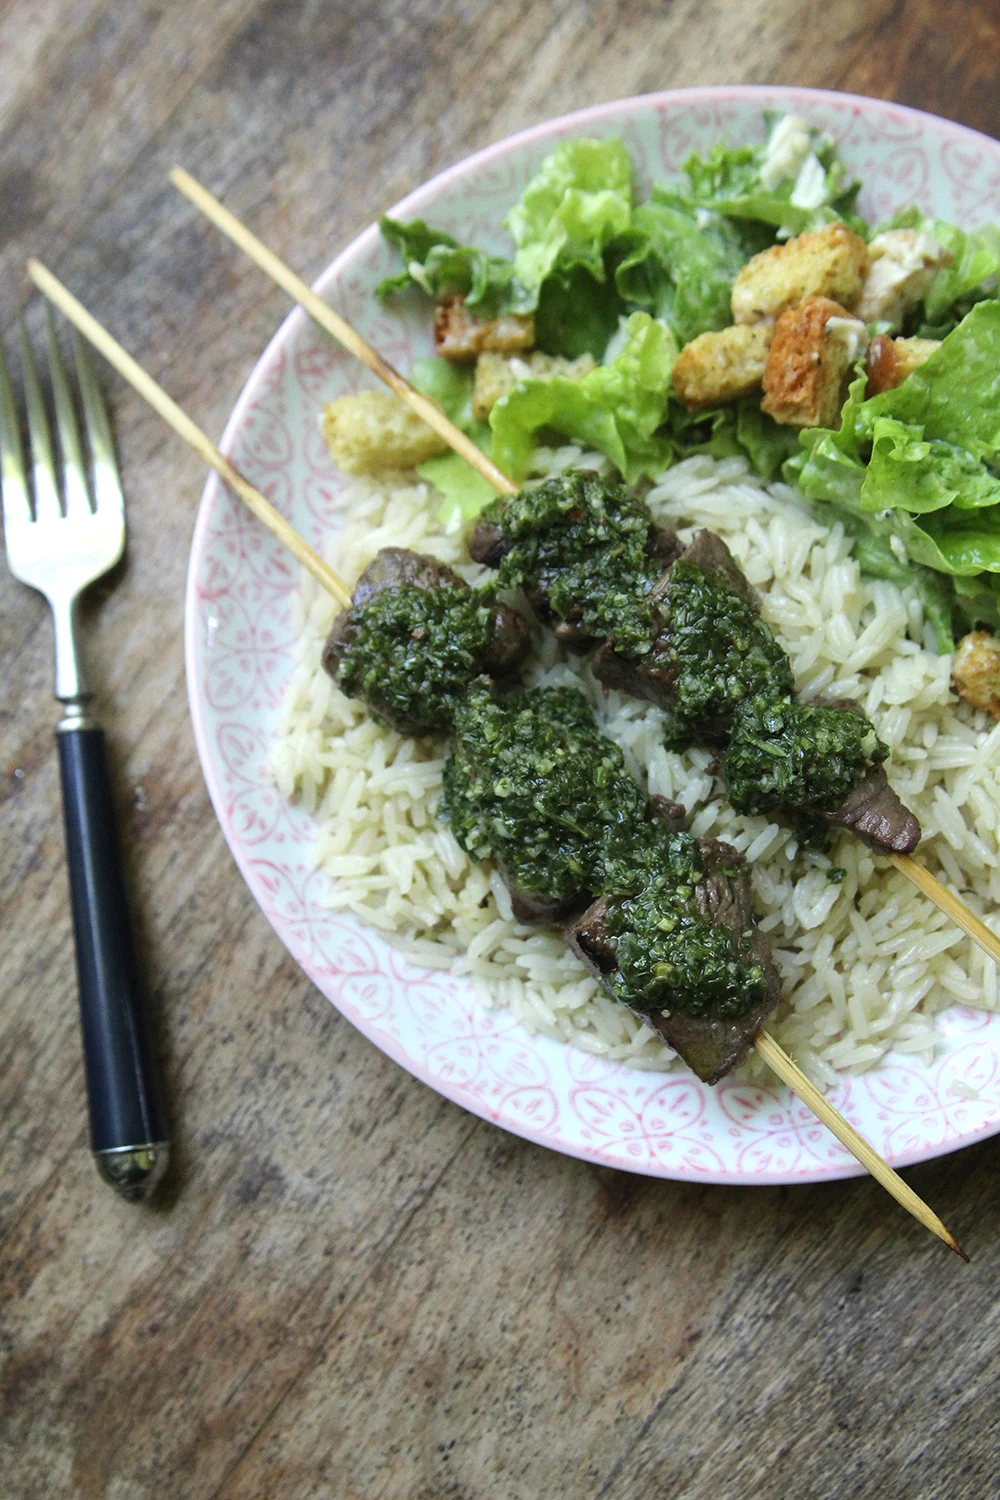 These Marinated Steak Skewers with Chimichurri are easy to make and delightfully flavorful.